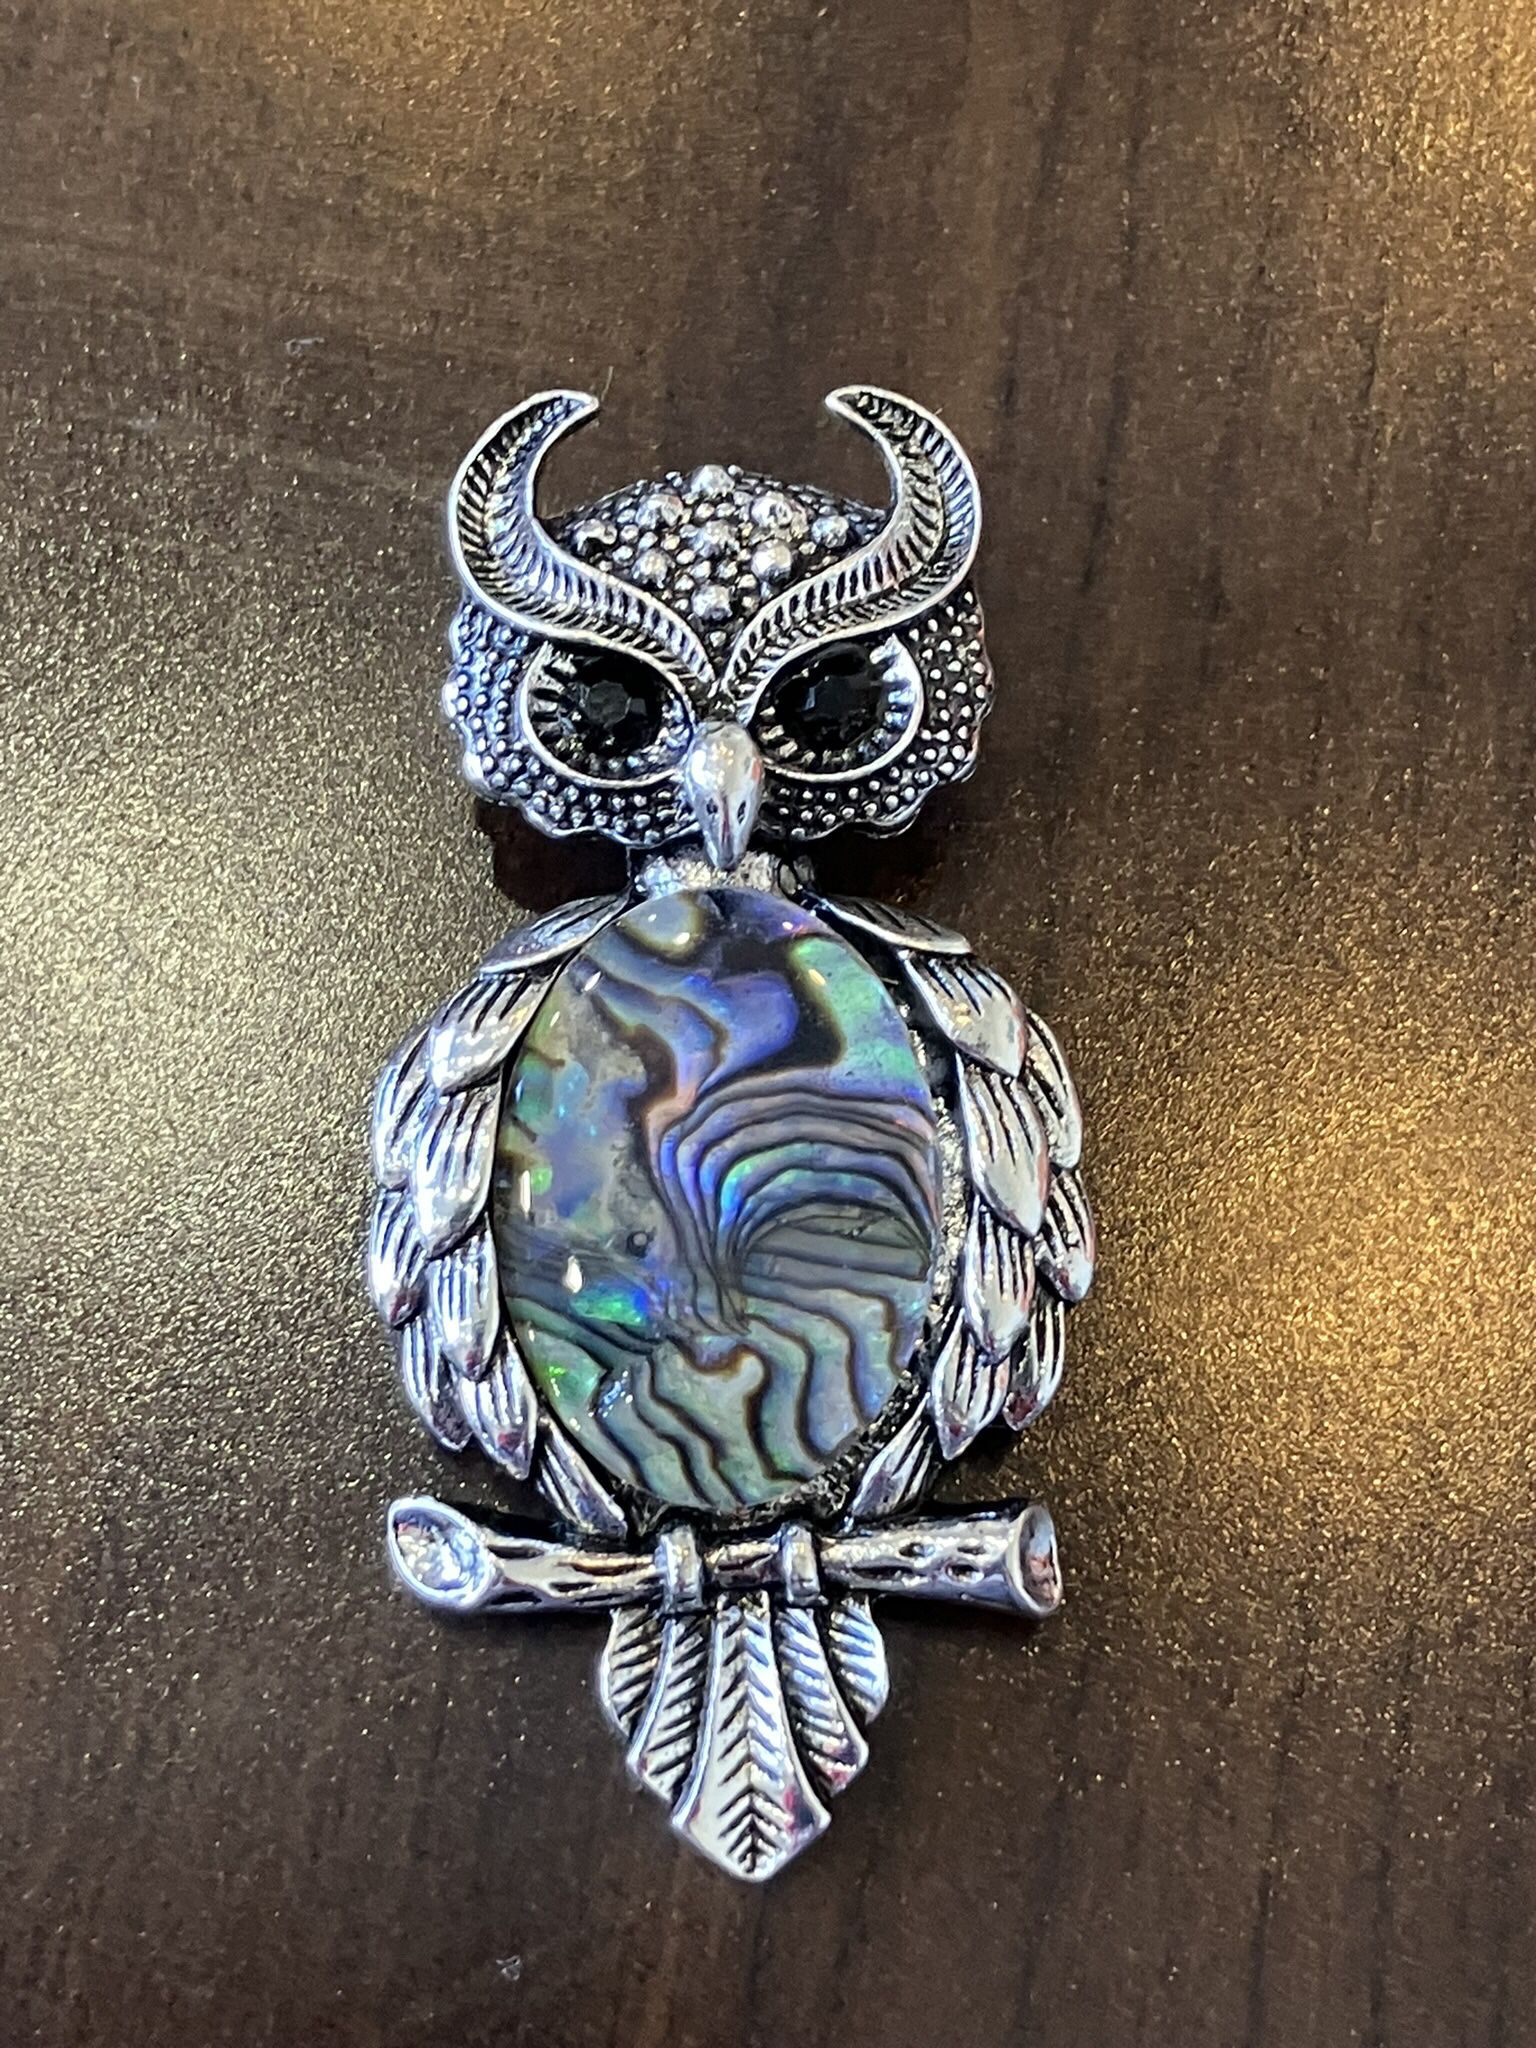 New Natural Abalone, Horned, Owl, Brooch Pin